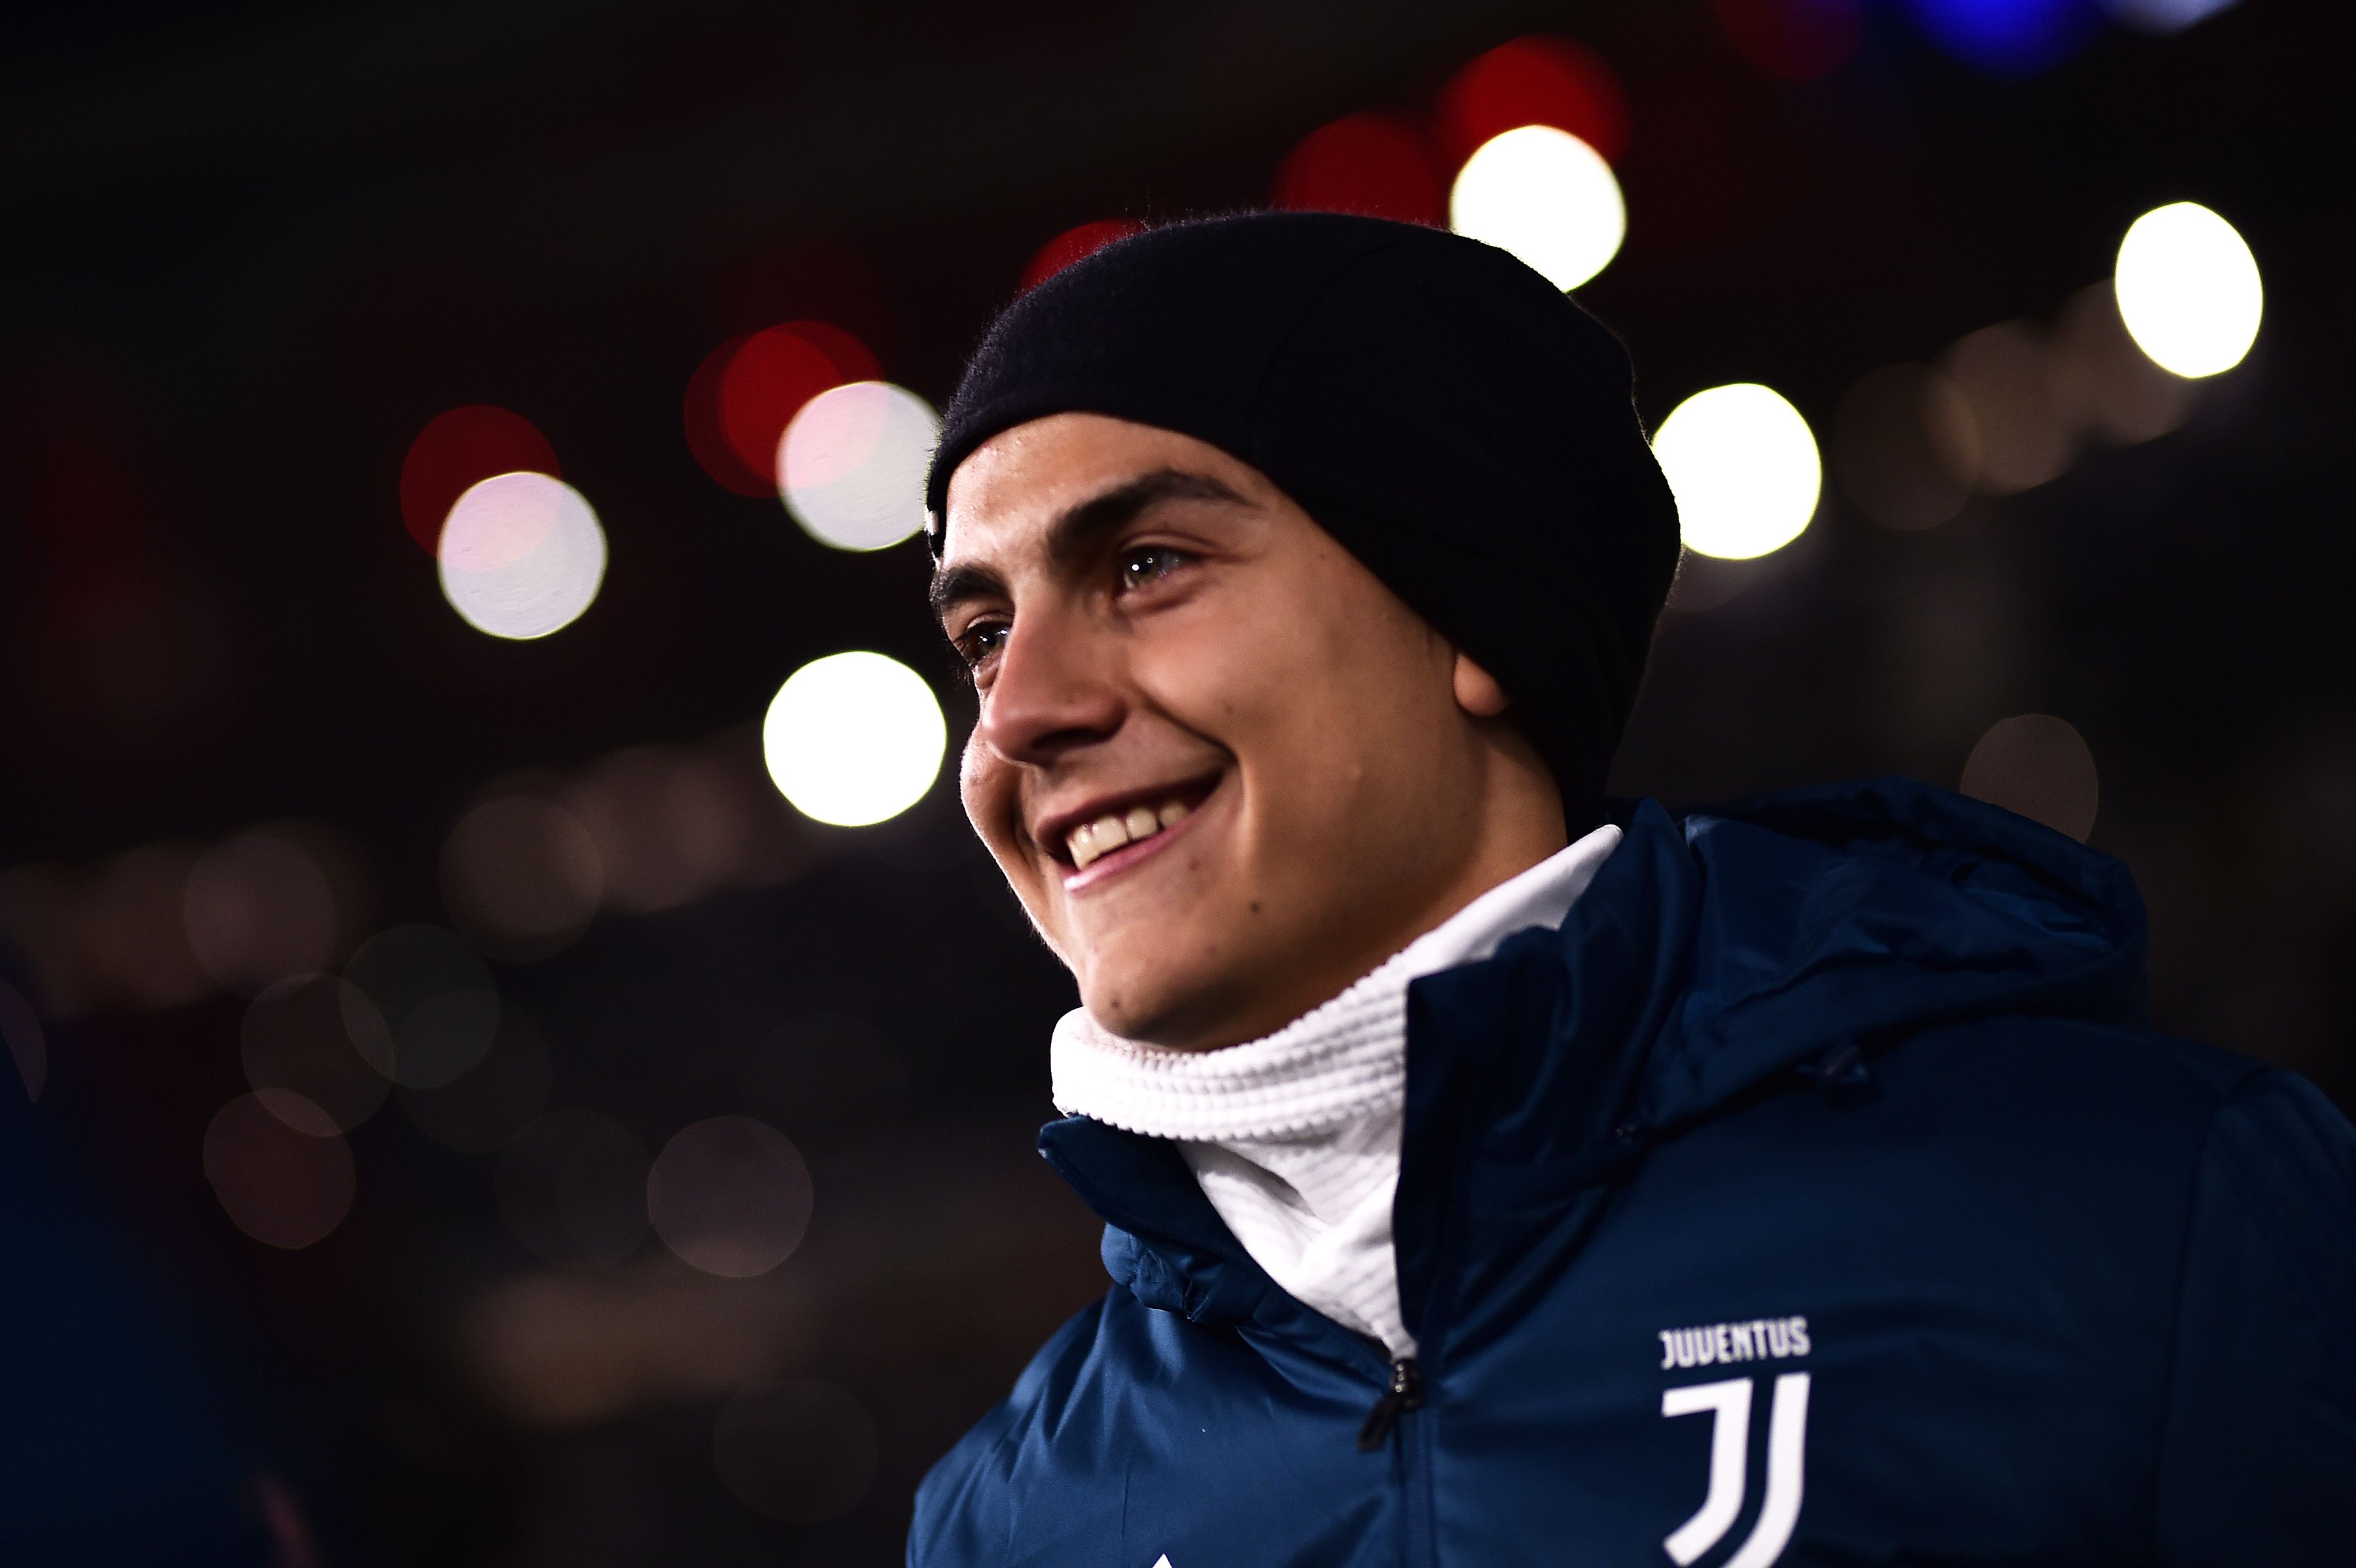 Juventus' Argentinian forward Paulo Dybala looks on during the Italian Serie A football match Juventus vs Inter Milan on December 9, 2017 at the Allianz stadium in Turin. / AFP PHOTO / MARCO BERTORELLO        (Photo credit should read MARCO BERTORELLO/AFP/Getty Images)